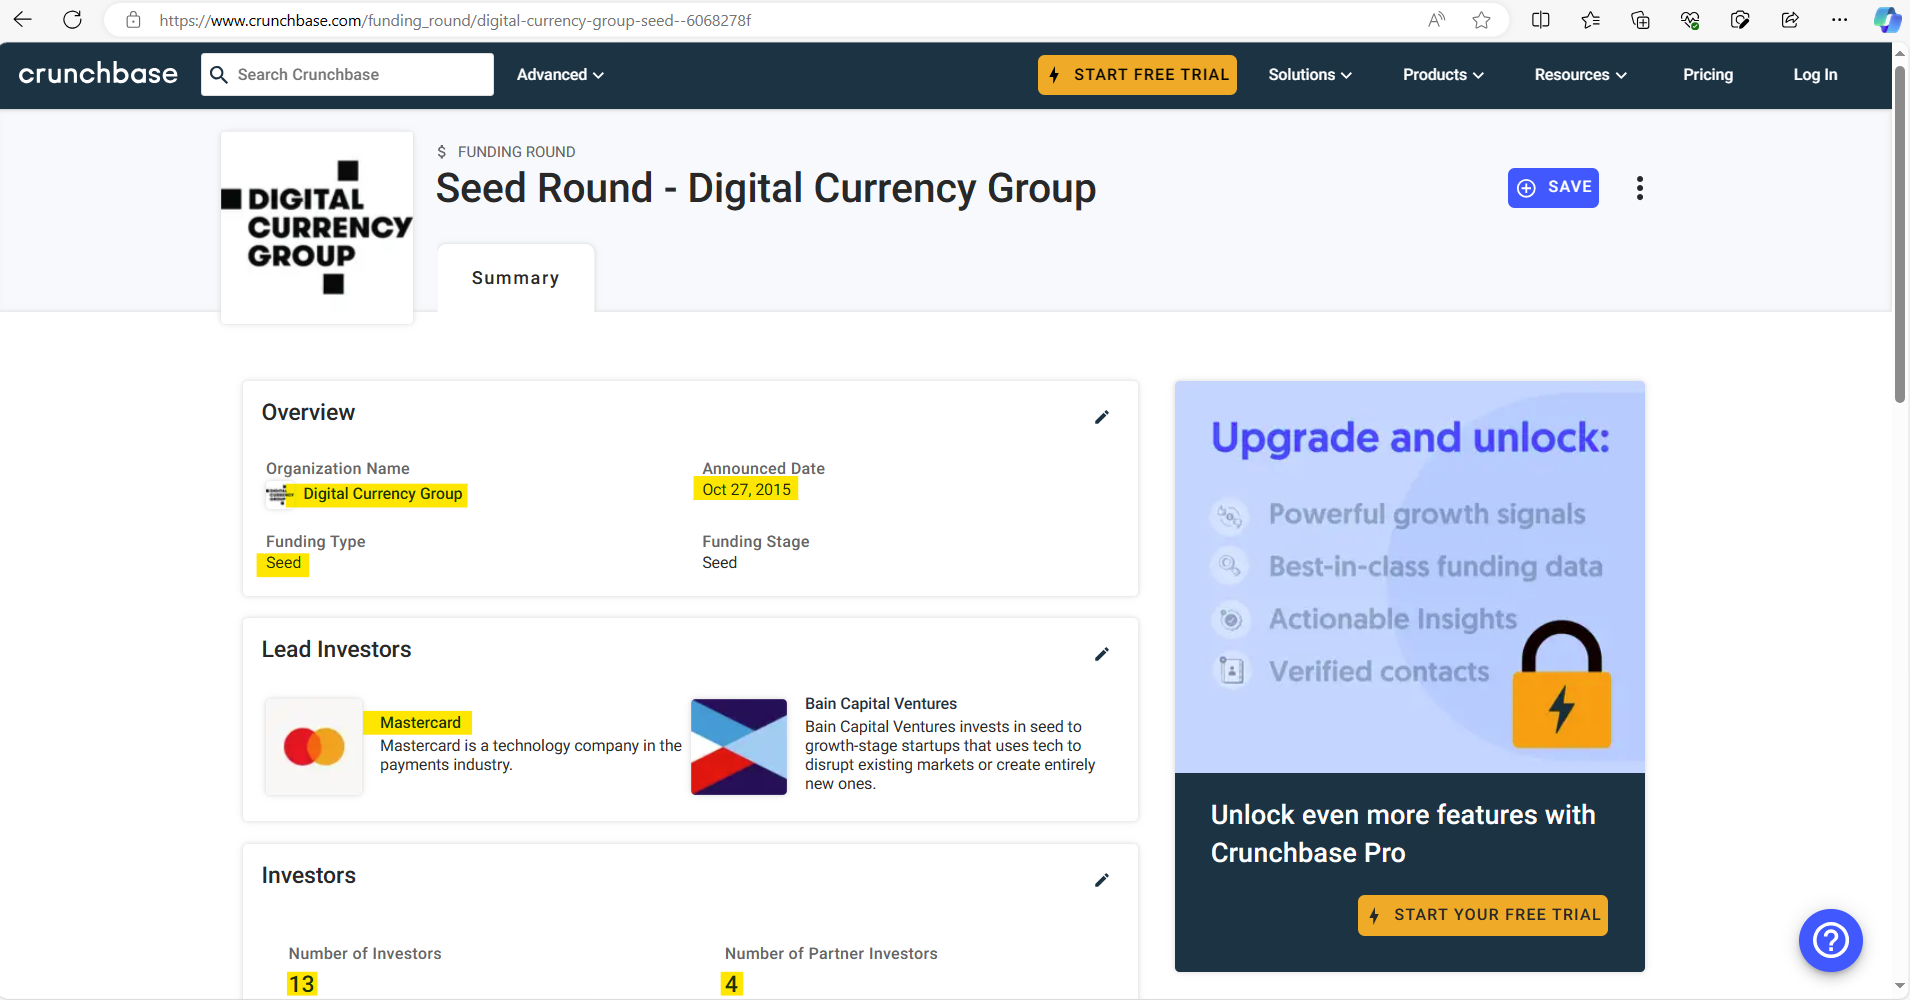 Seed Round - Digital Currency Group